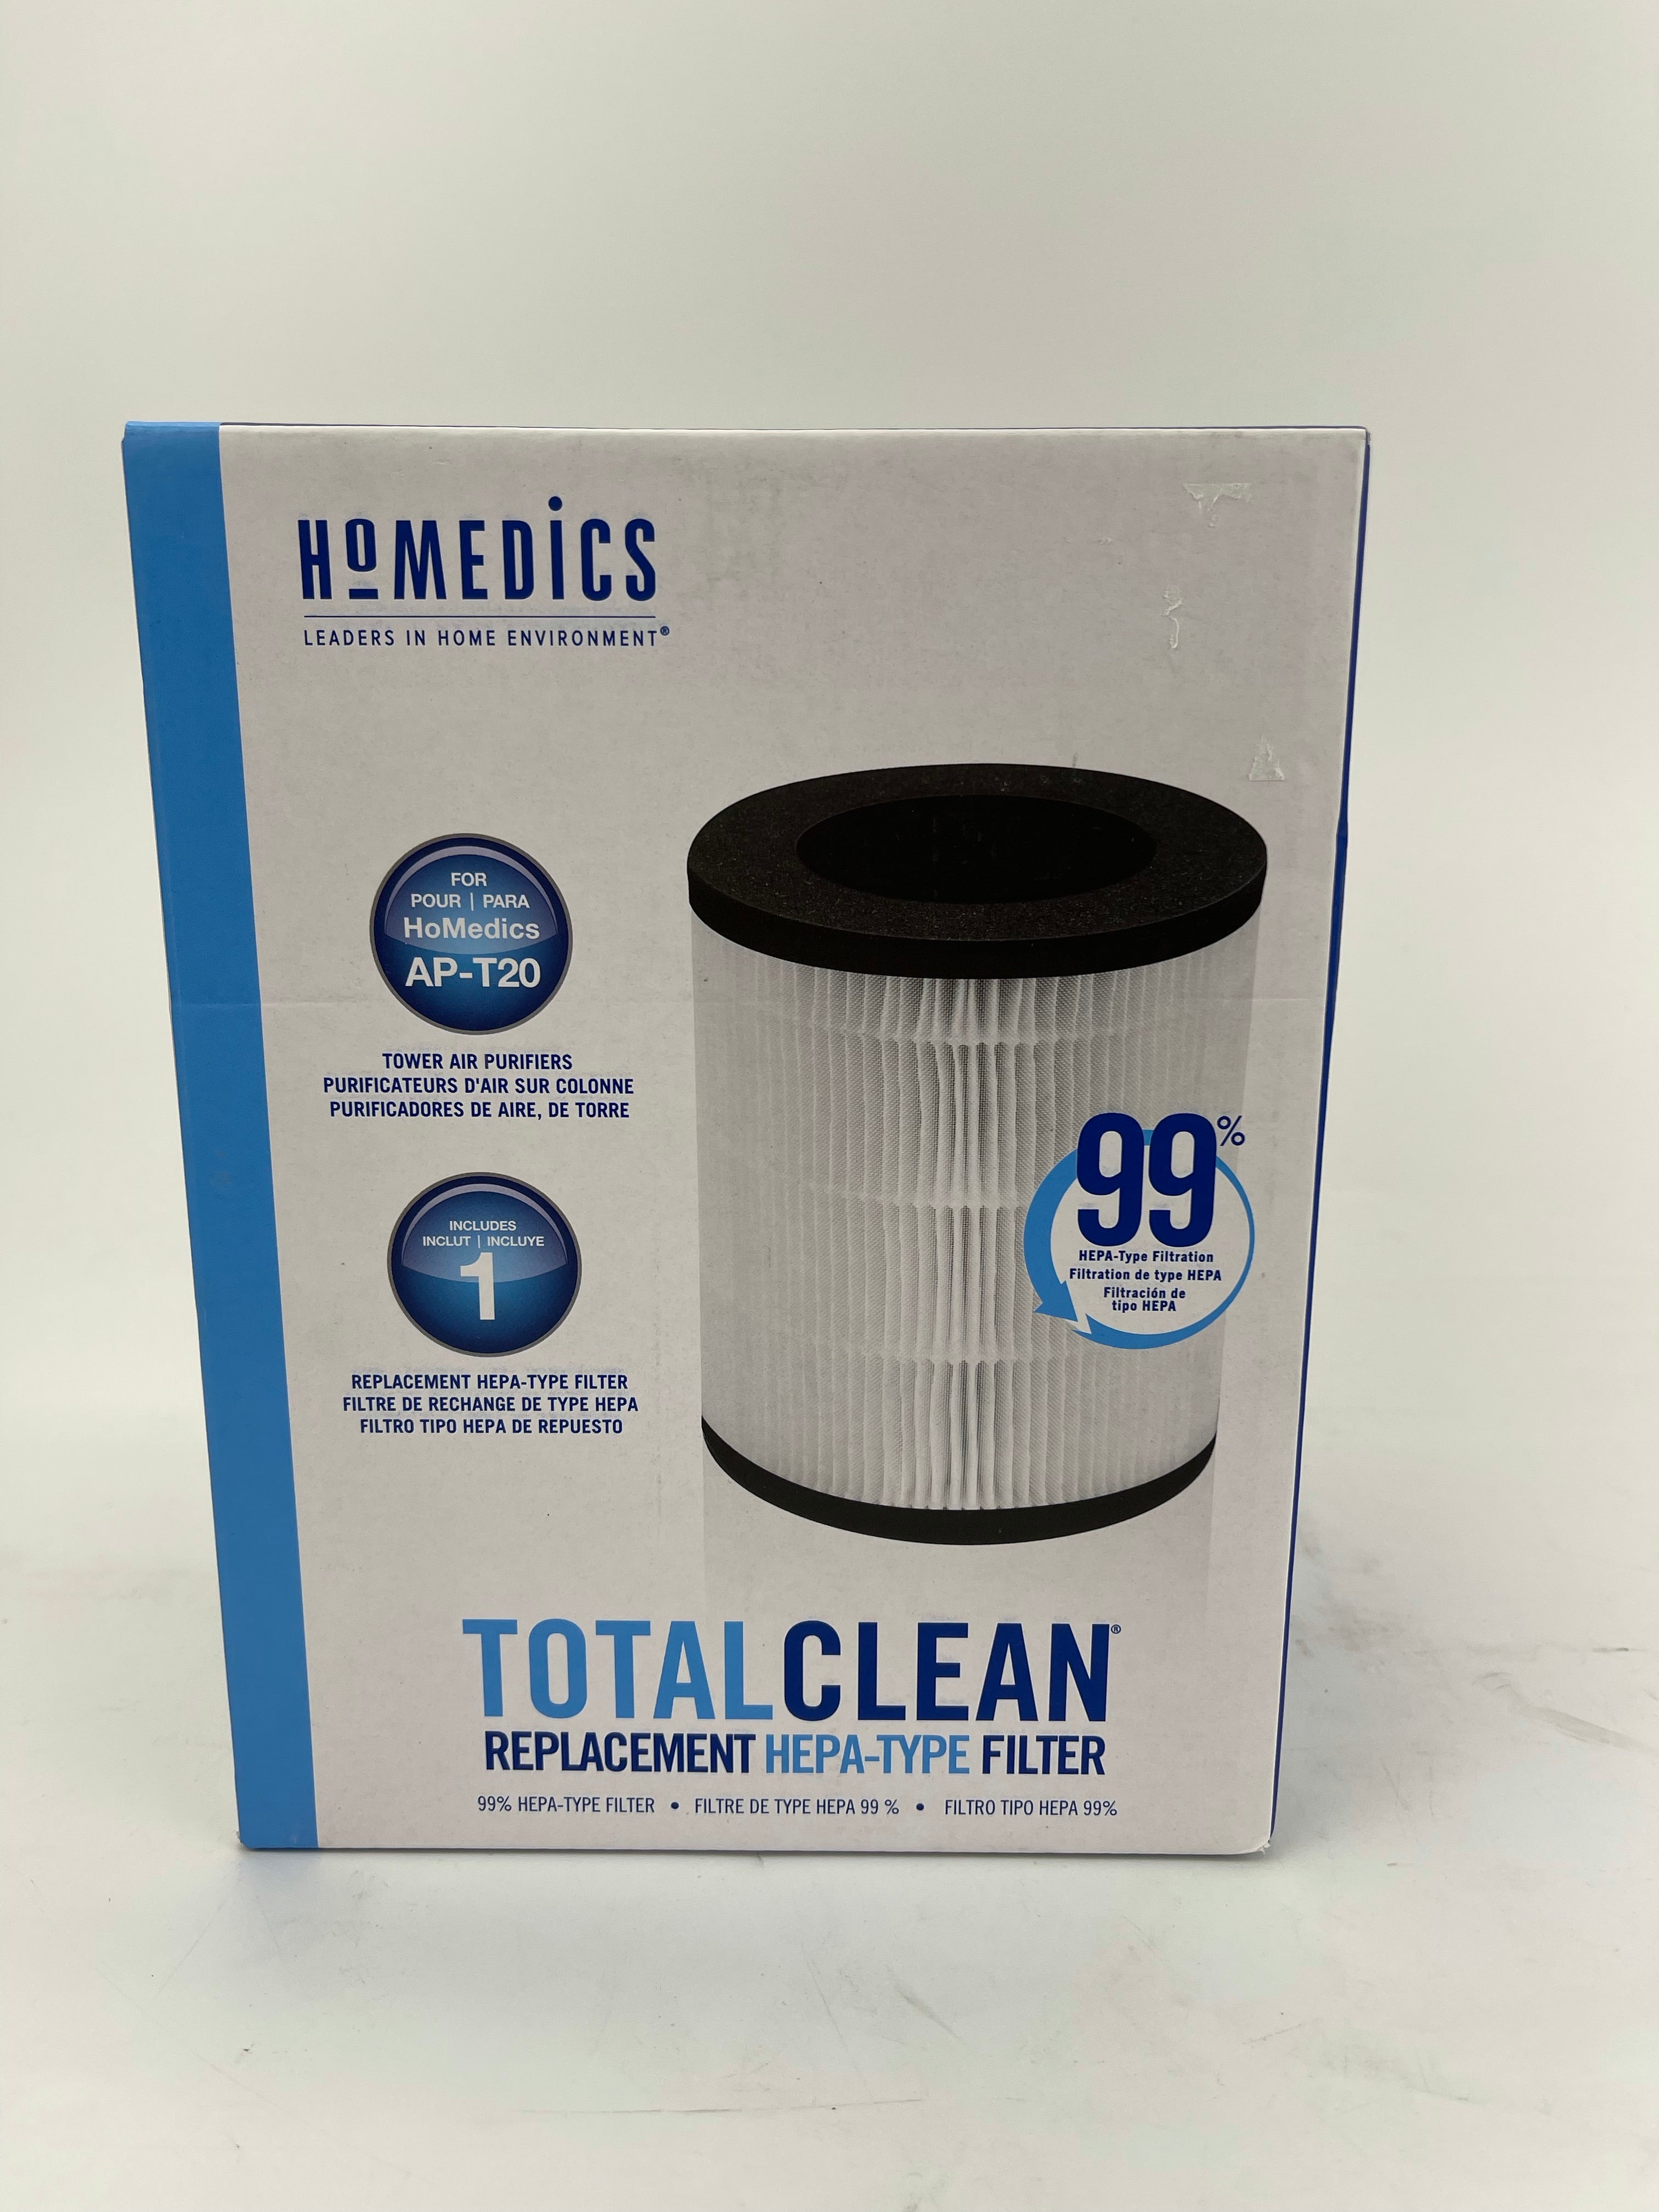 https://bigboxoutletstore.ca/media/catalog/product/H/o/HoMedics-TotalClean-Replacement-HEPA-Type-Filter-AP-T20FL.jpg?width=170&height=170&store=default&image-type=small_image